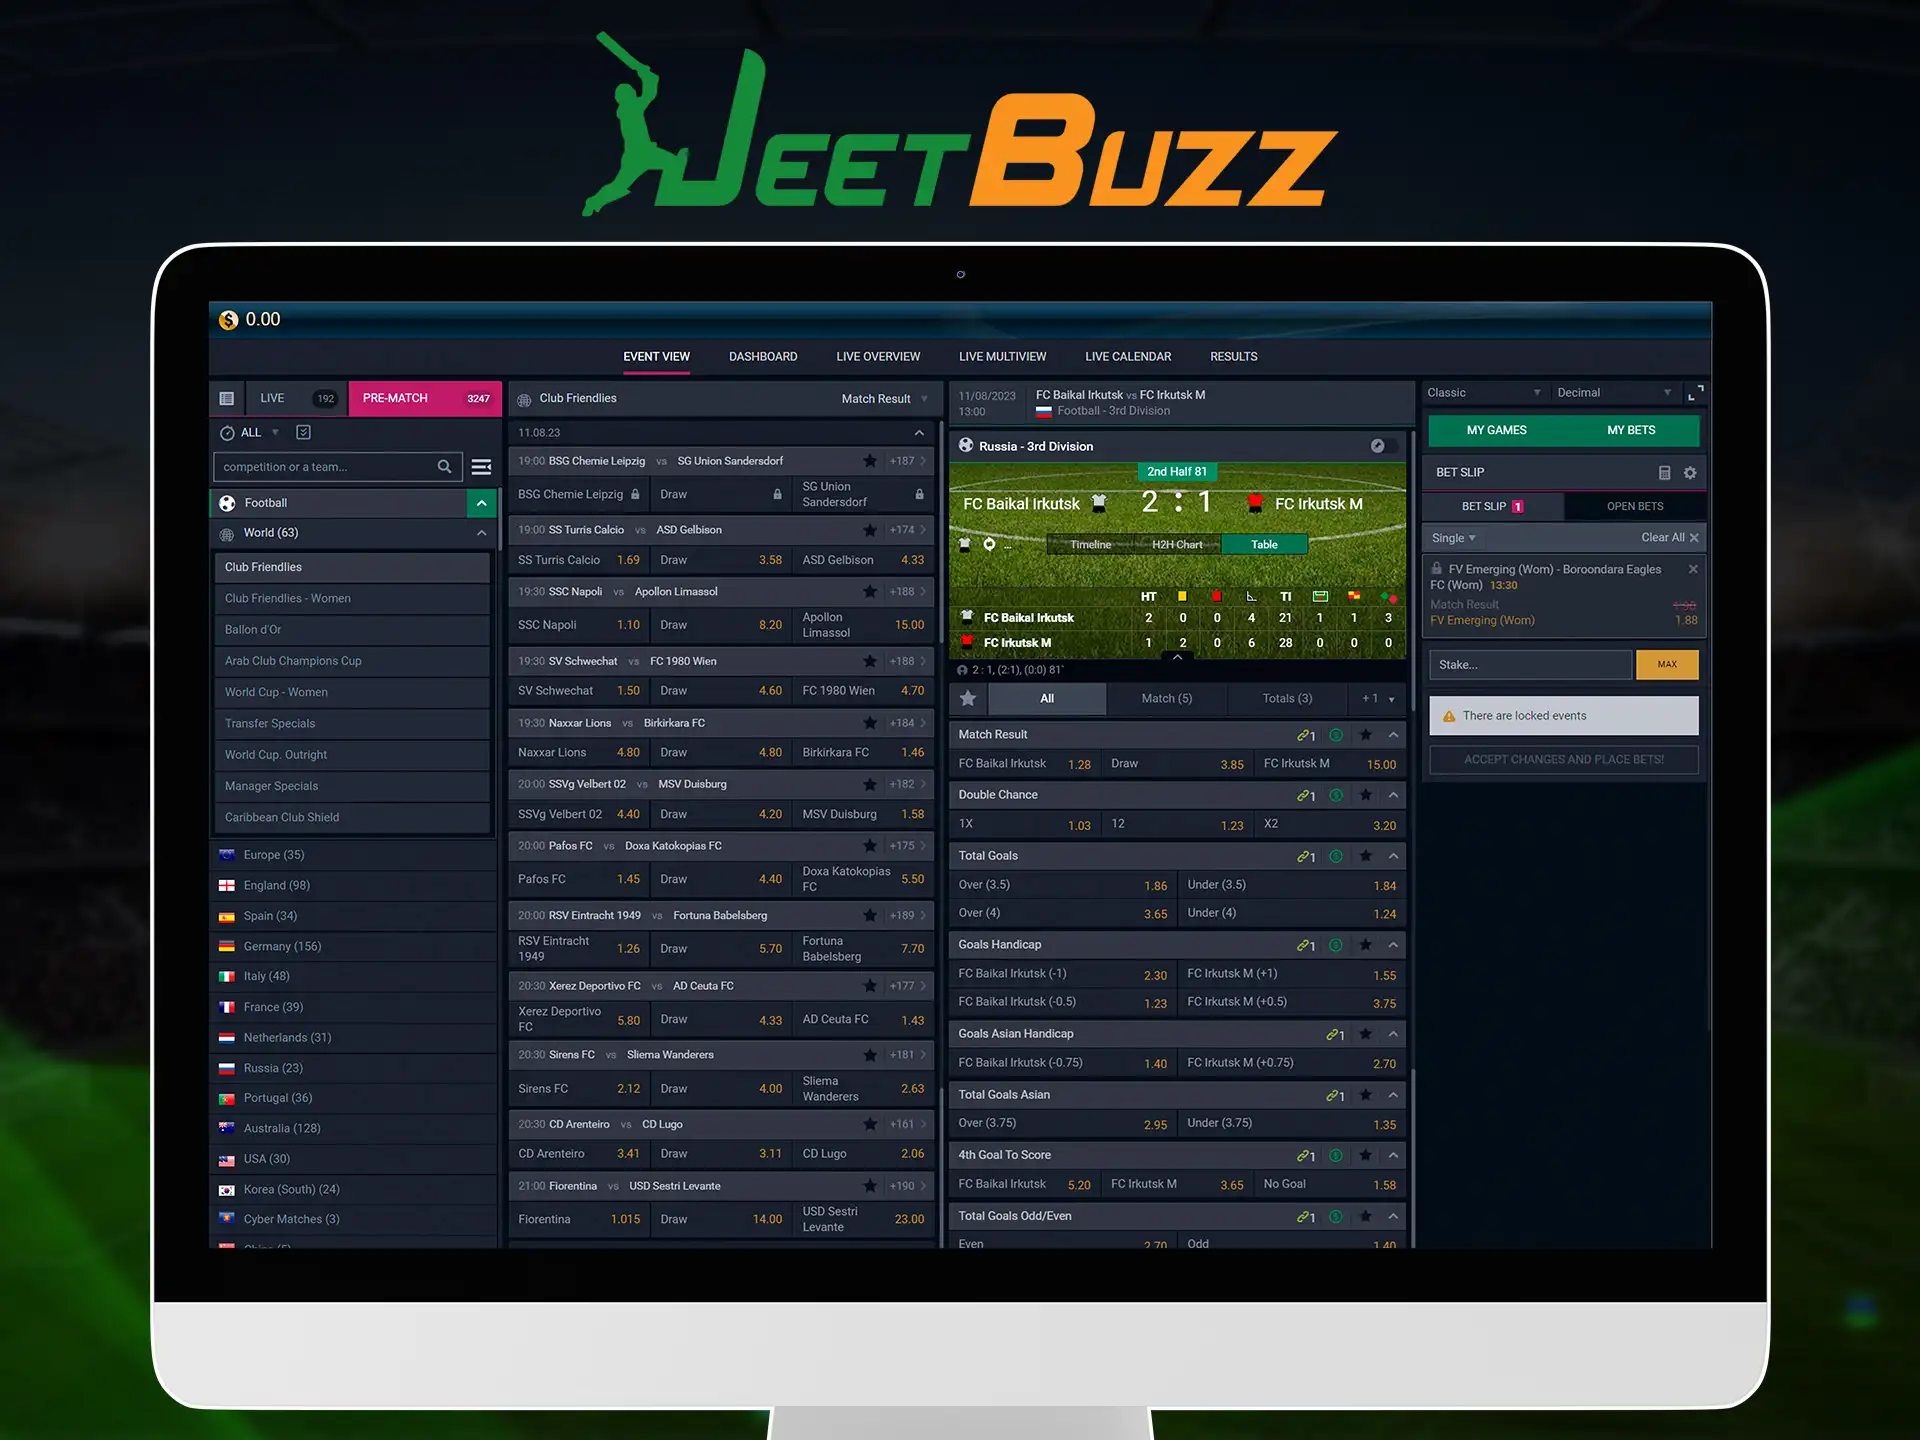 Choose modes that are available to JeetBuzz customers and bet on matches.